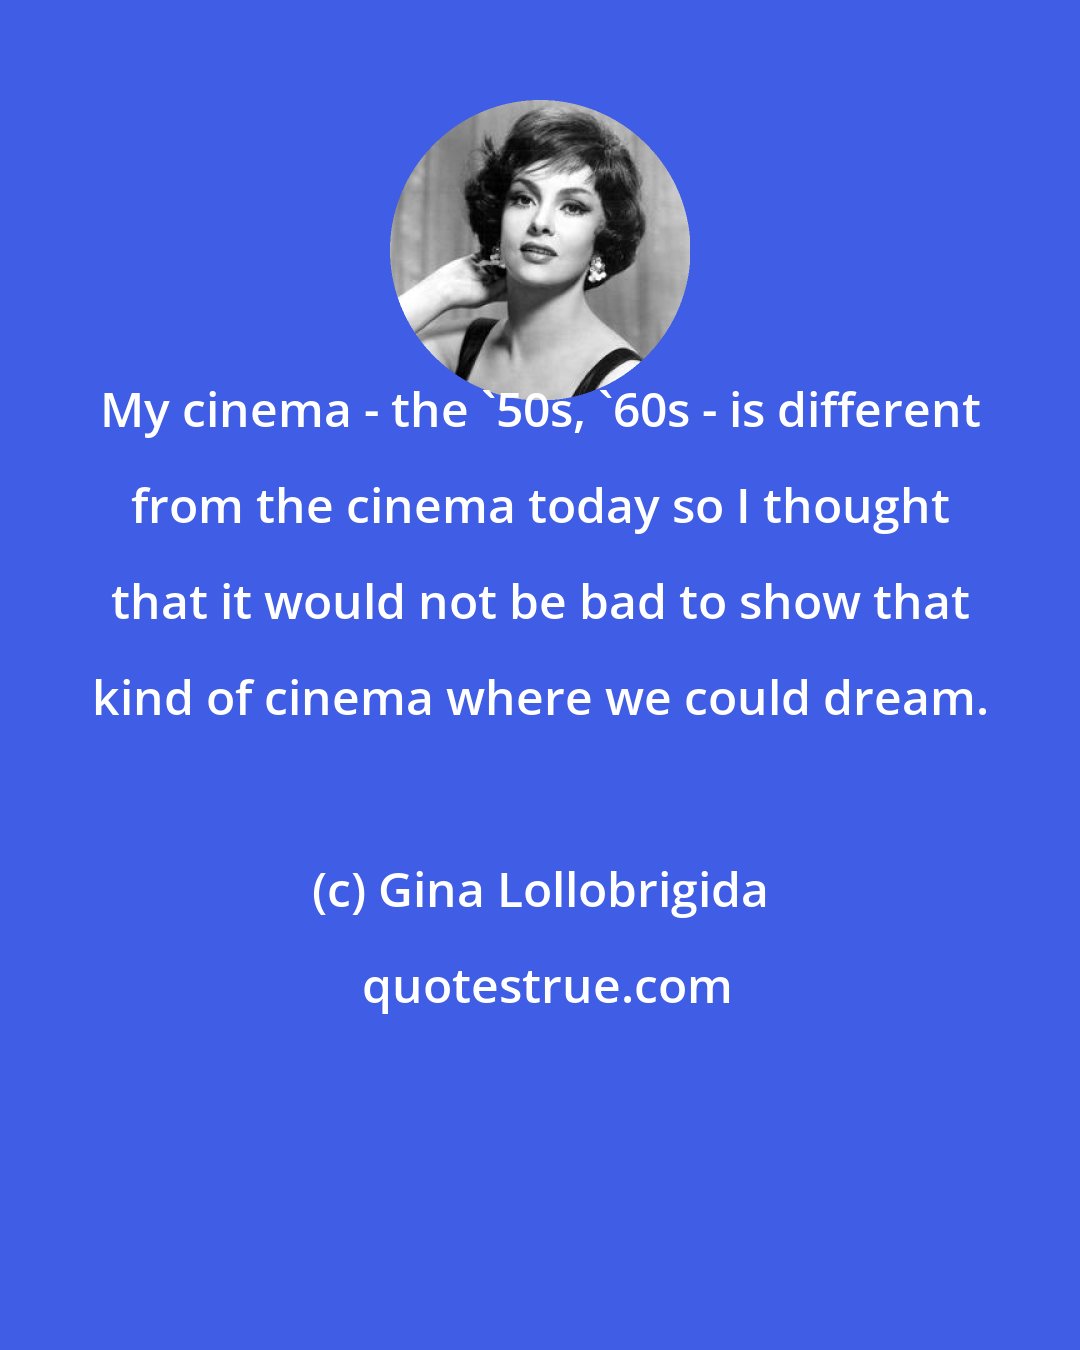 Gina Lollobrigida: My cinema - the '50s, '60s - is different from the cinema today so I thought that it would not be bad to show that kind of cinema where we could dream.